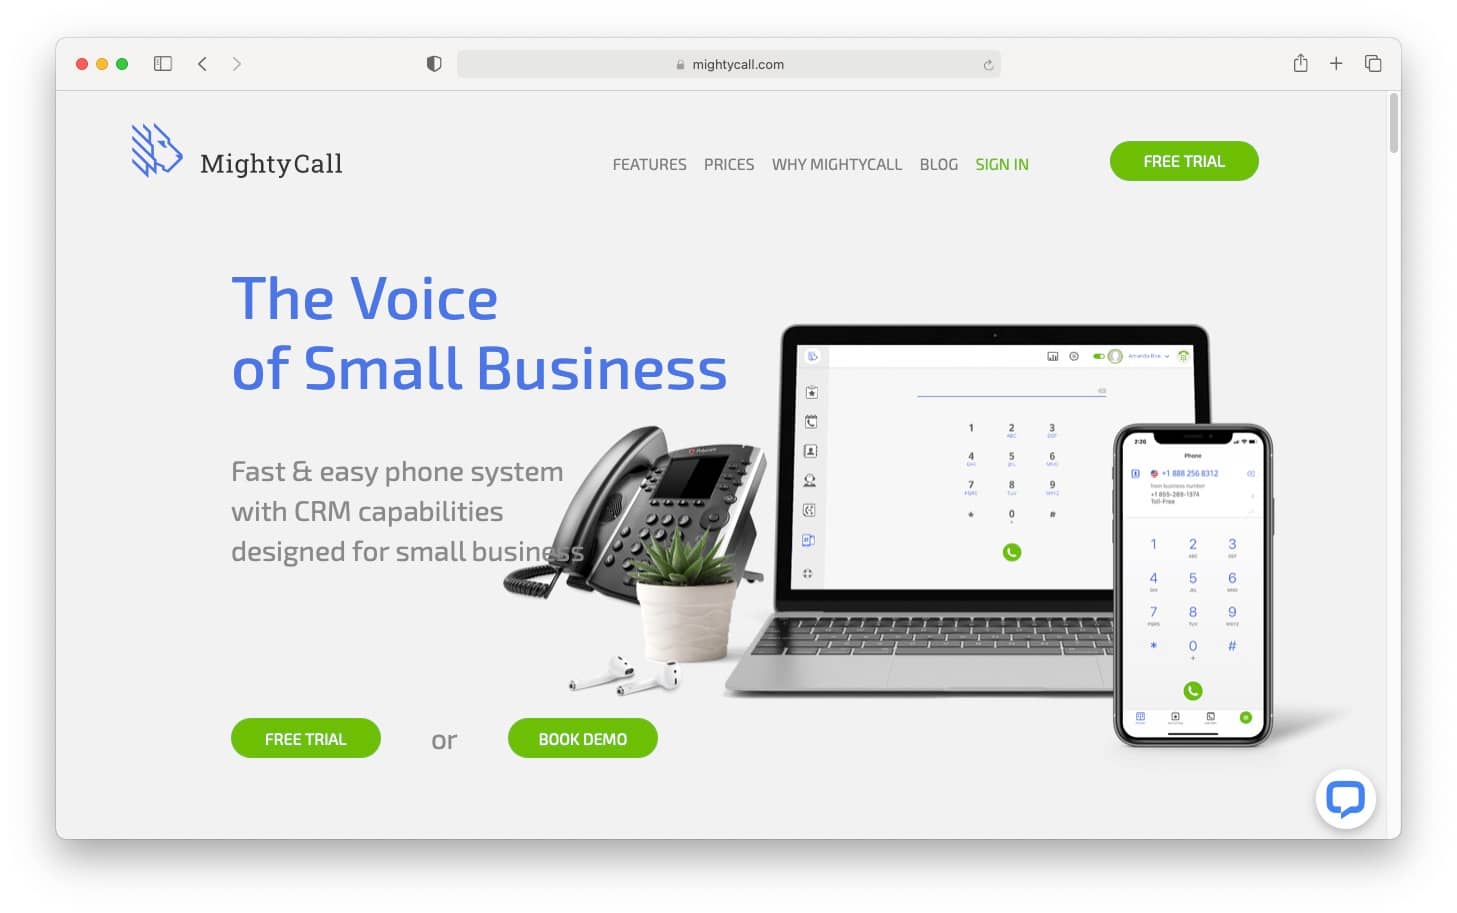 MightyCall is one of the virtual phone systems suited to small businesses